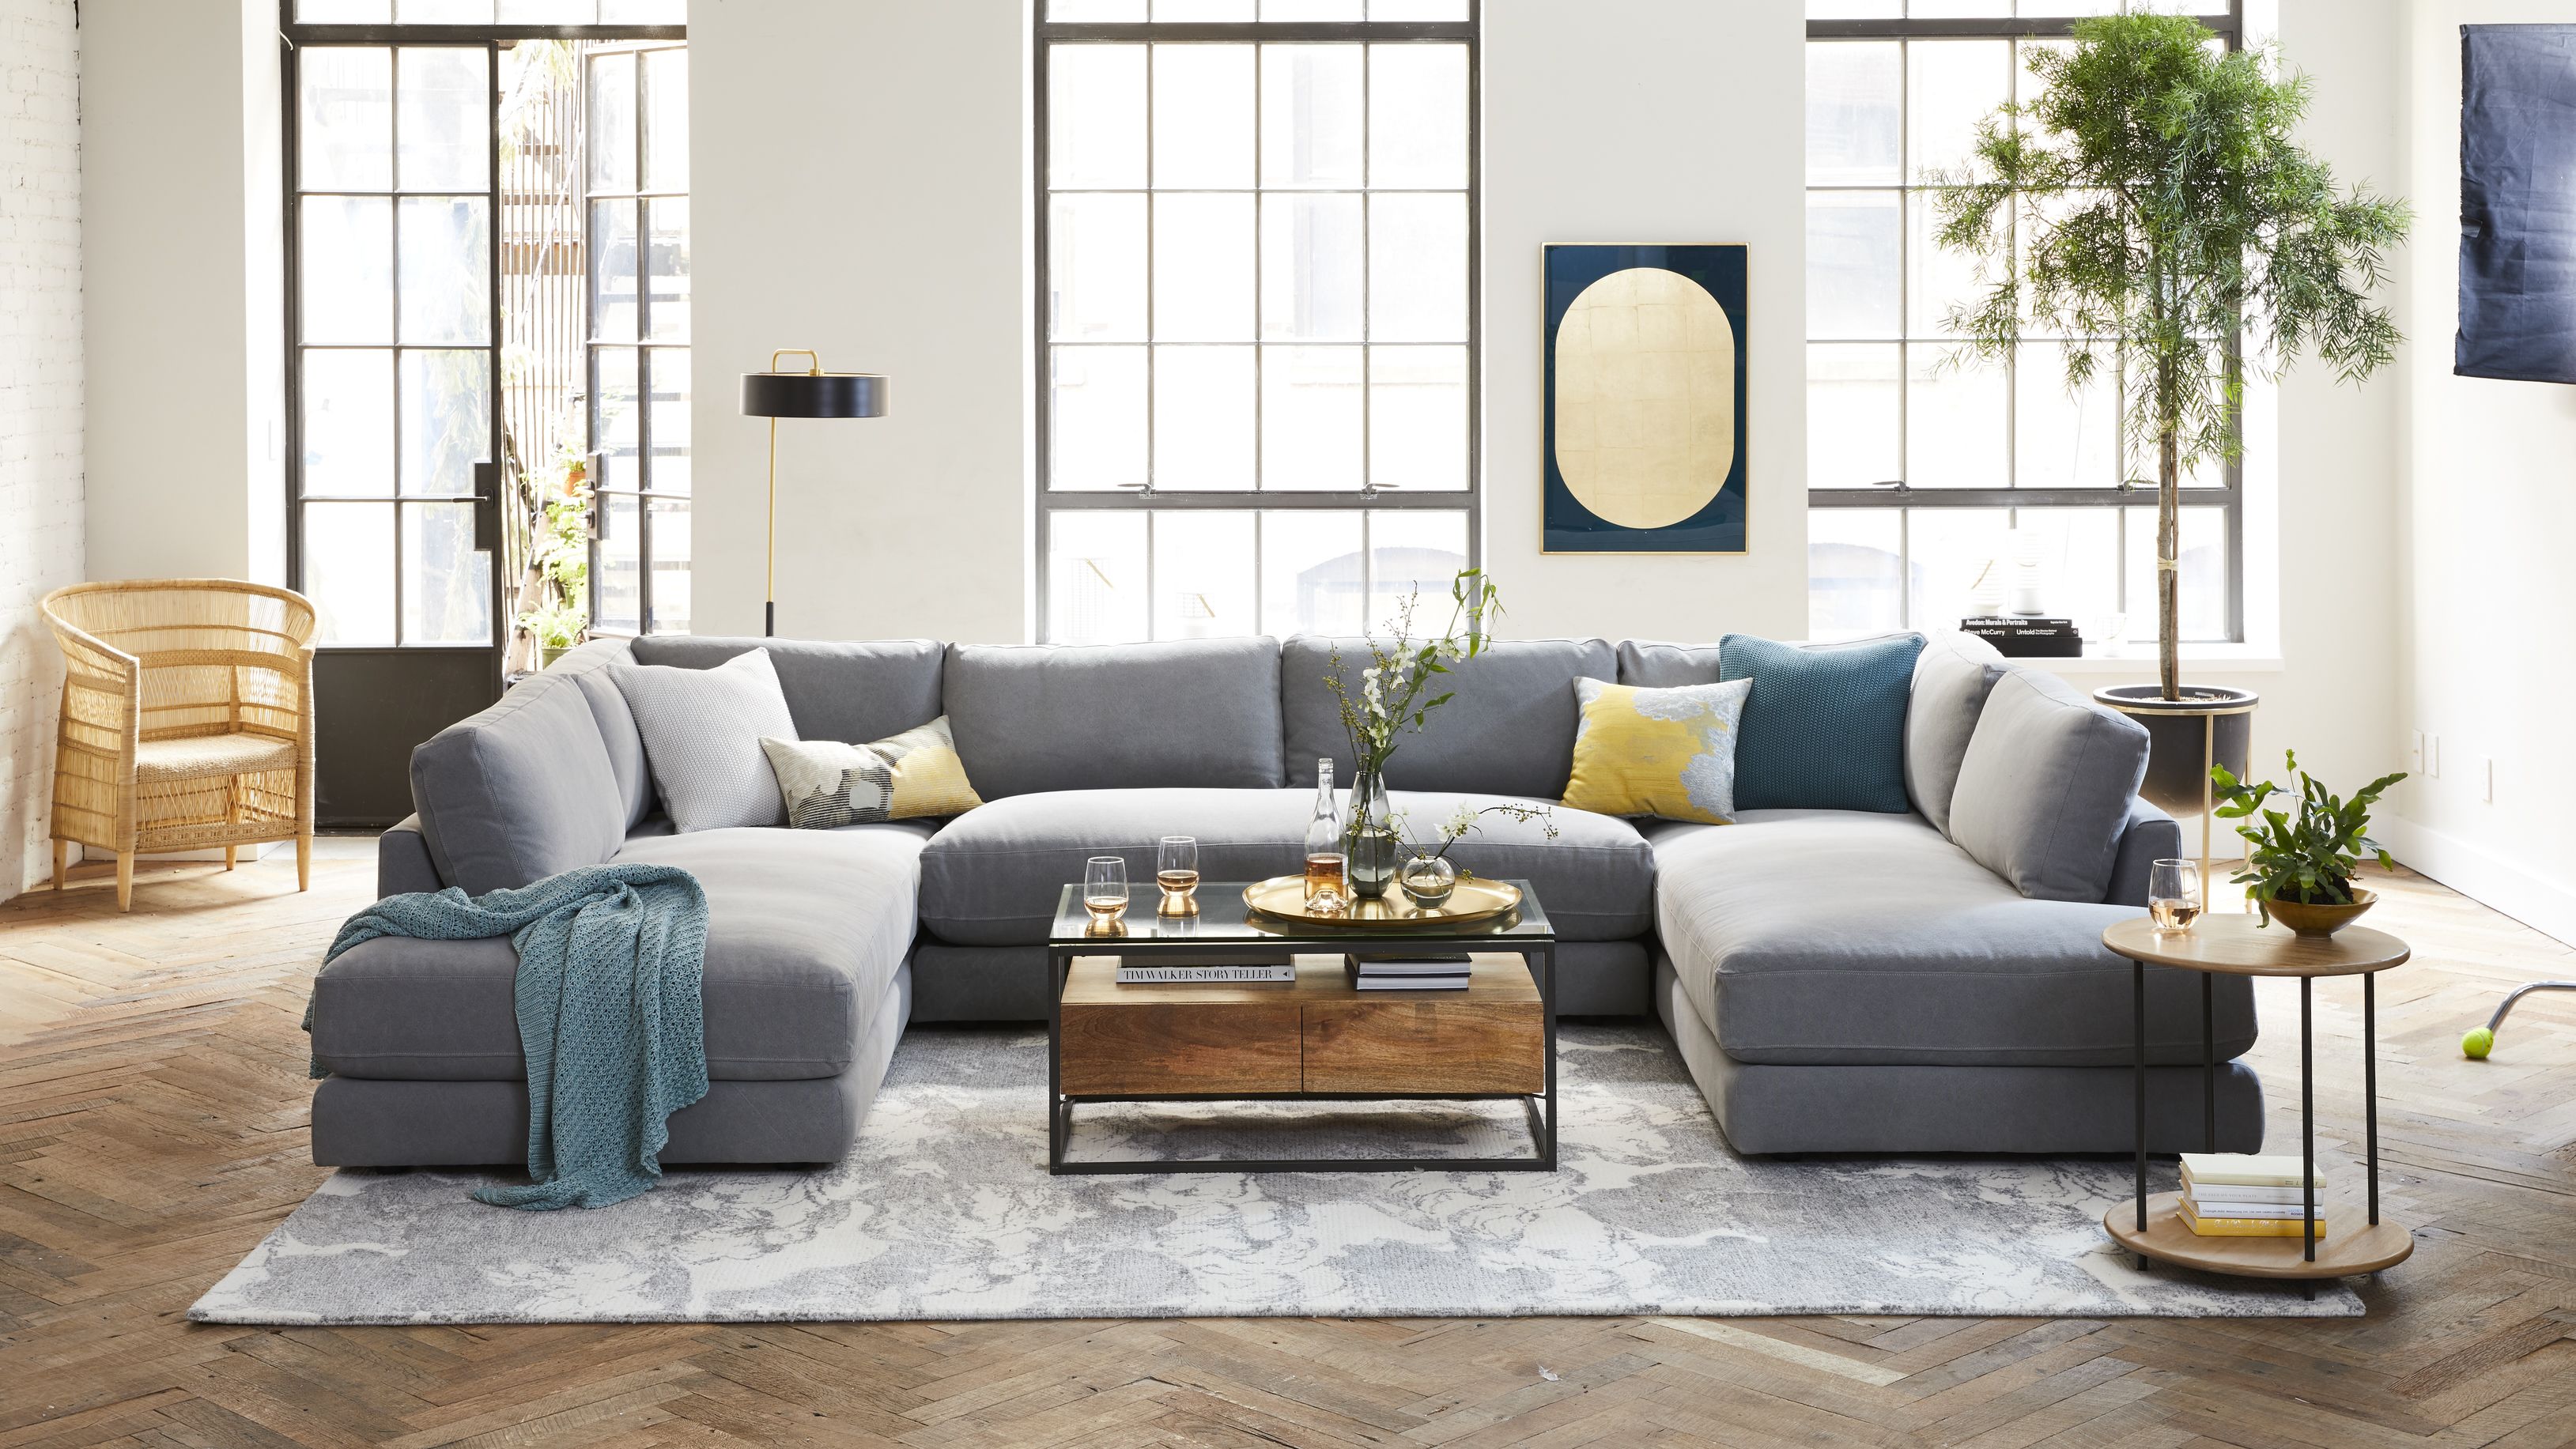 Why West Elm is partnering with Rent the Runway